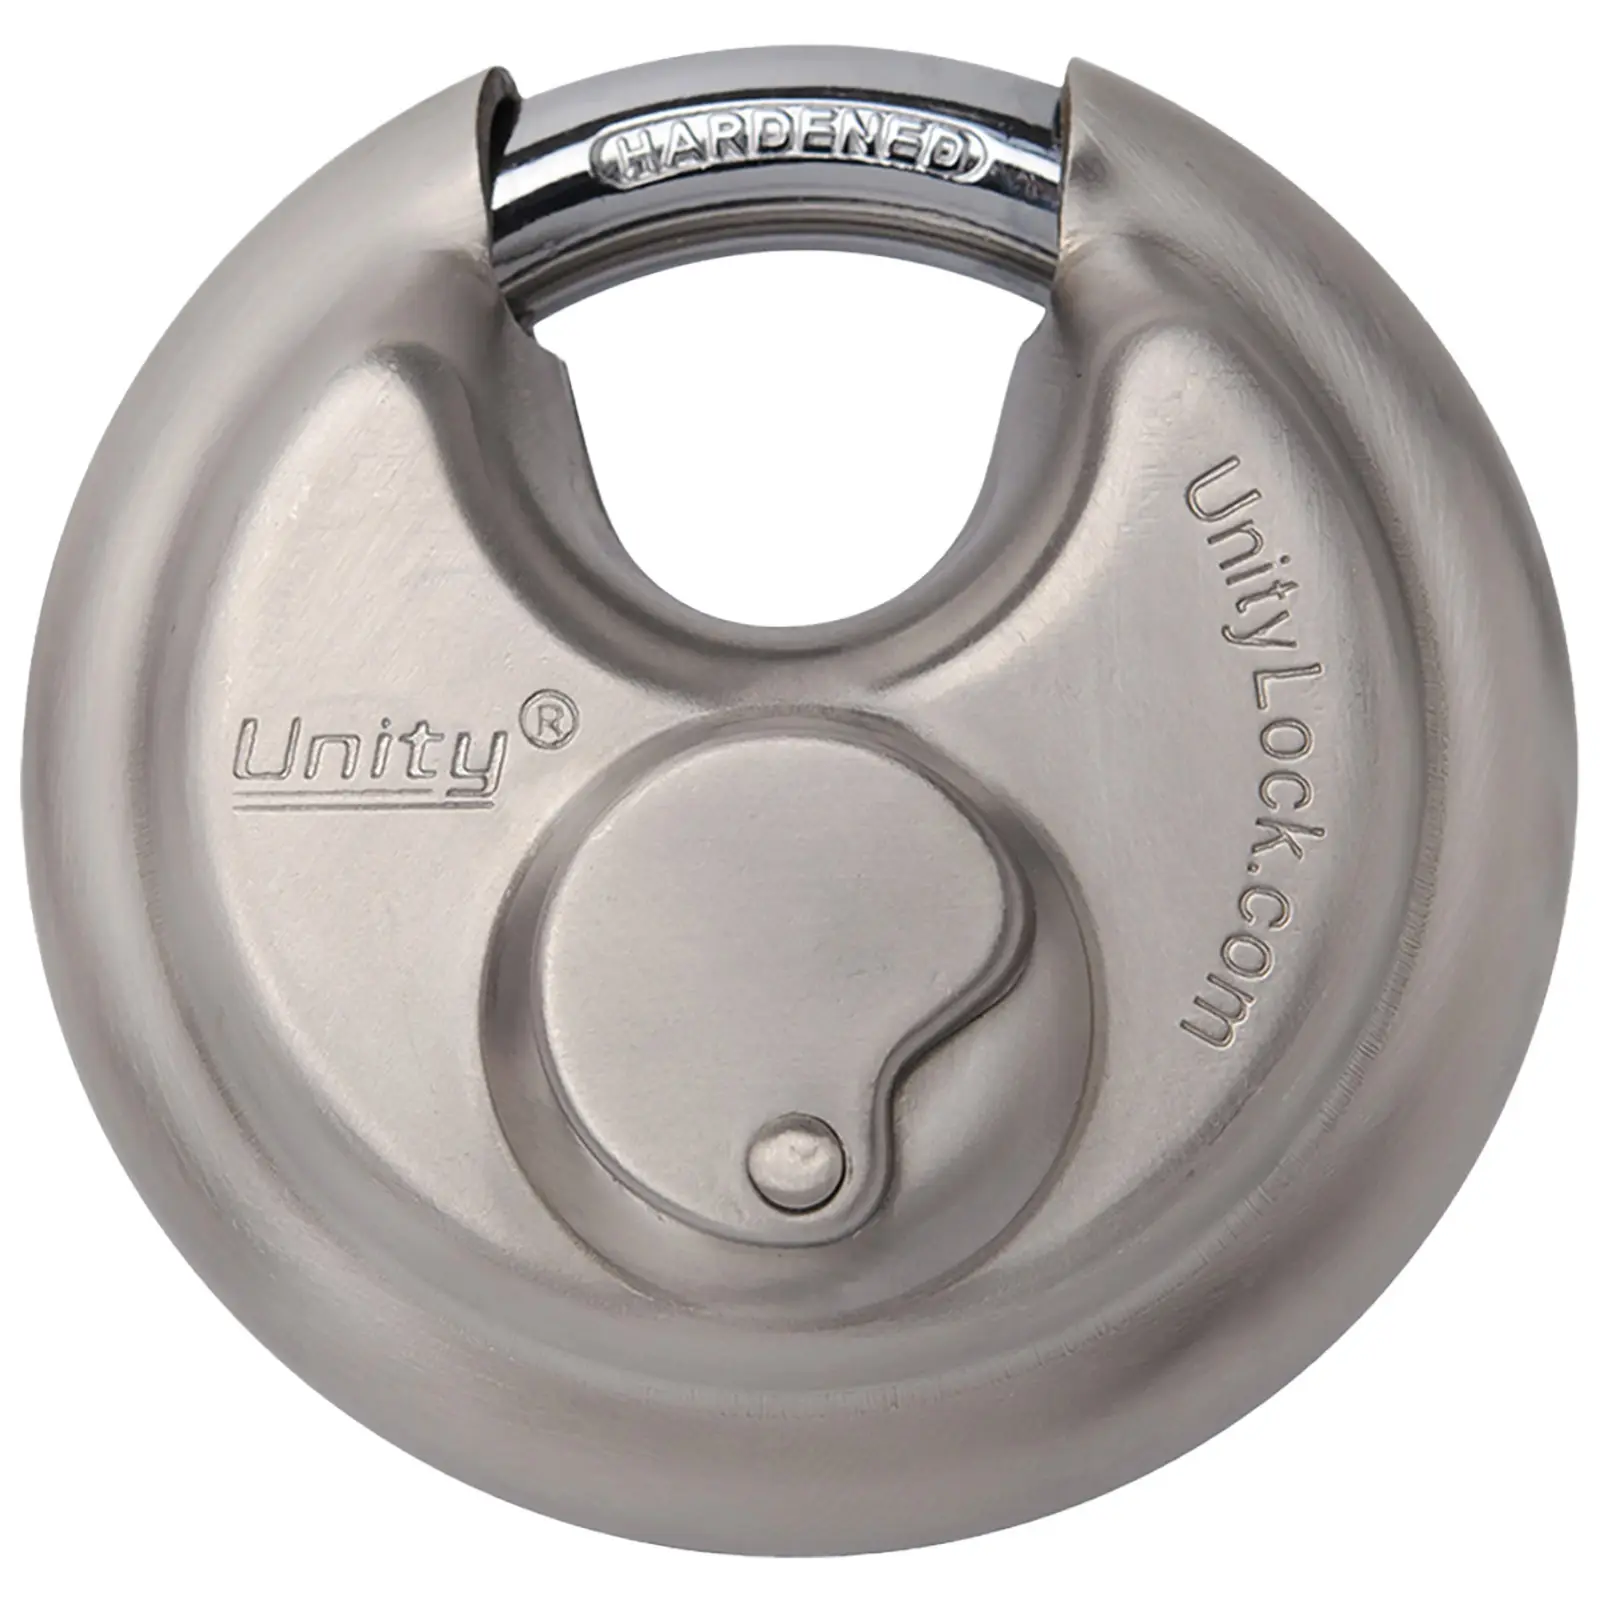 Stainless Steel disc Padlock with dust Cover, Keep Cylinder Clean, Keyway Protection 2-3/4"(70mm) Great for Truck, Trailer, Van